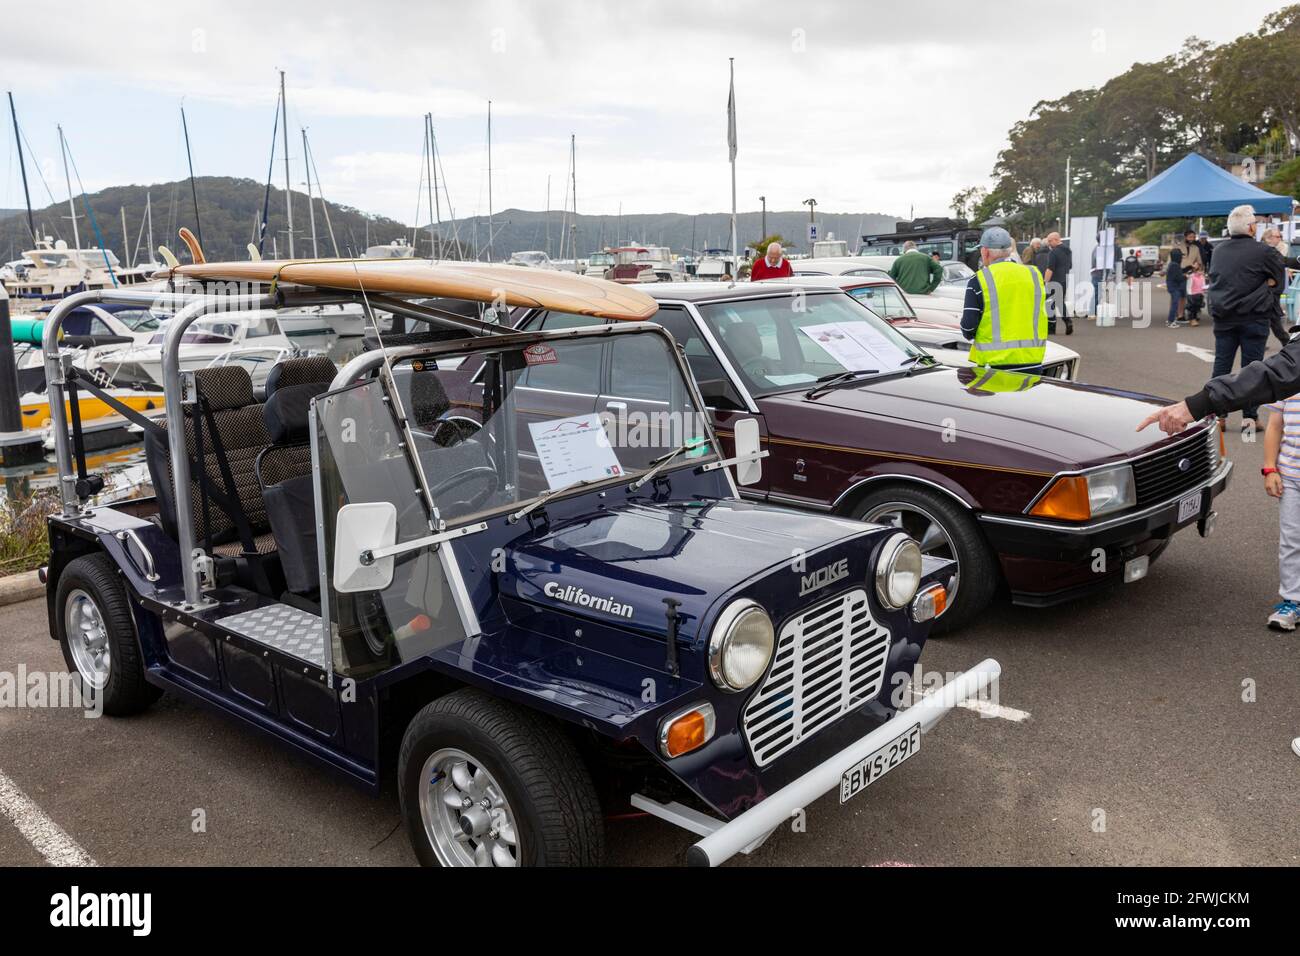 1981 British leyland Mini moke californian with surfboard on the roof at an Australian classic car show in Sydney,NSW,Australia Stock Photo